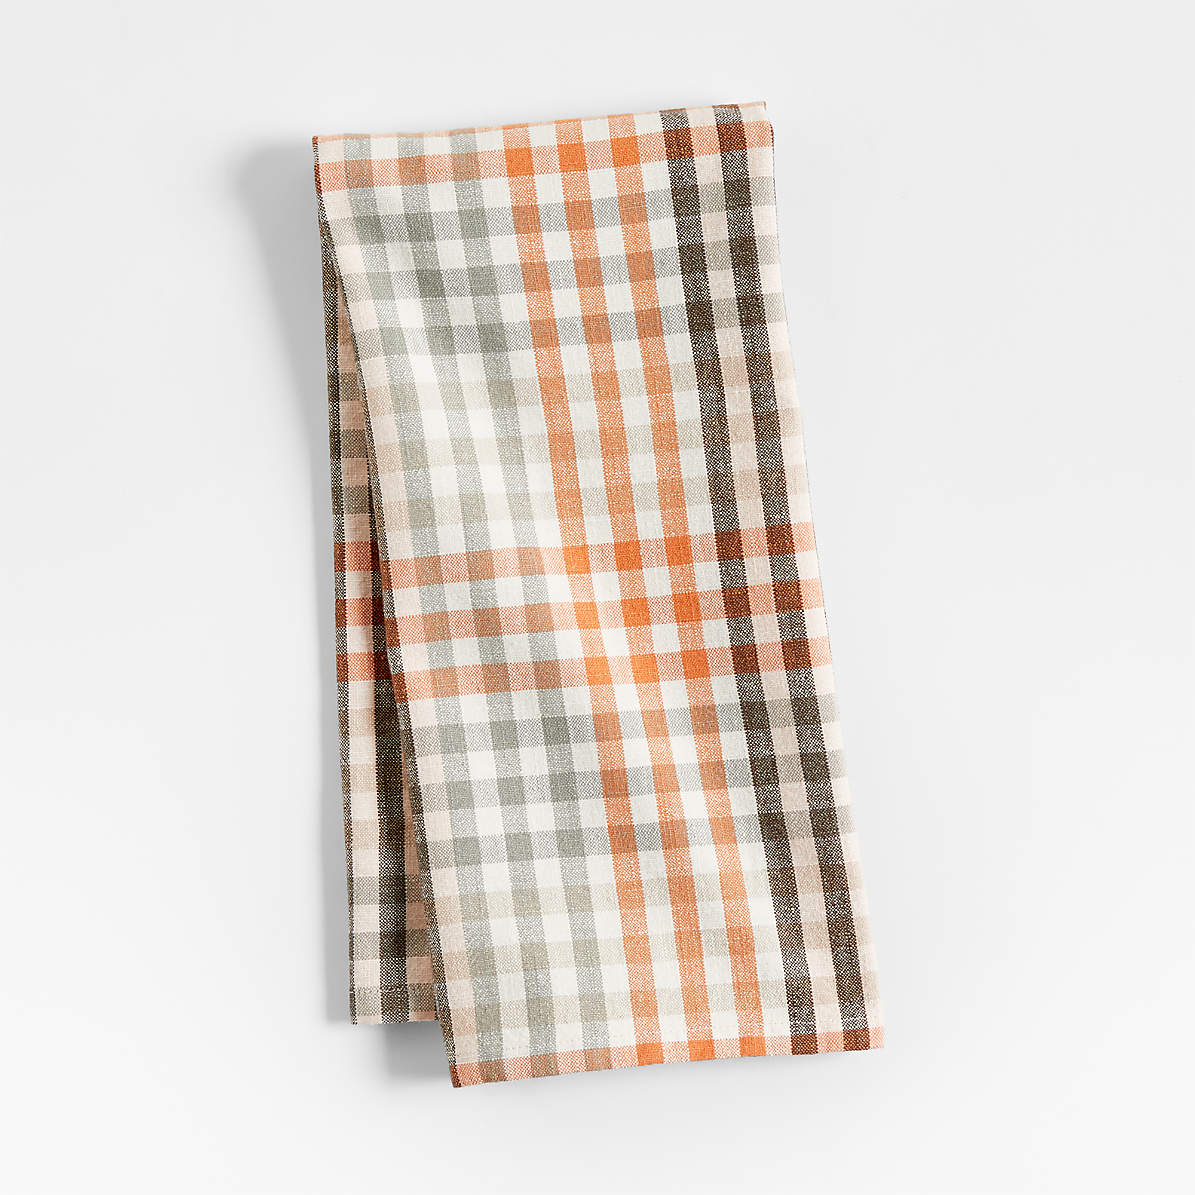 Full Circle Home Kind Organic Cotton Plant-Dyed Dish Towel